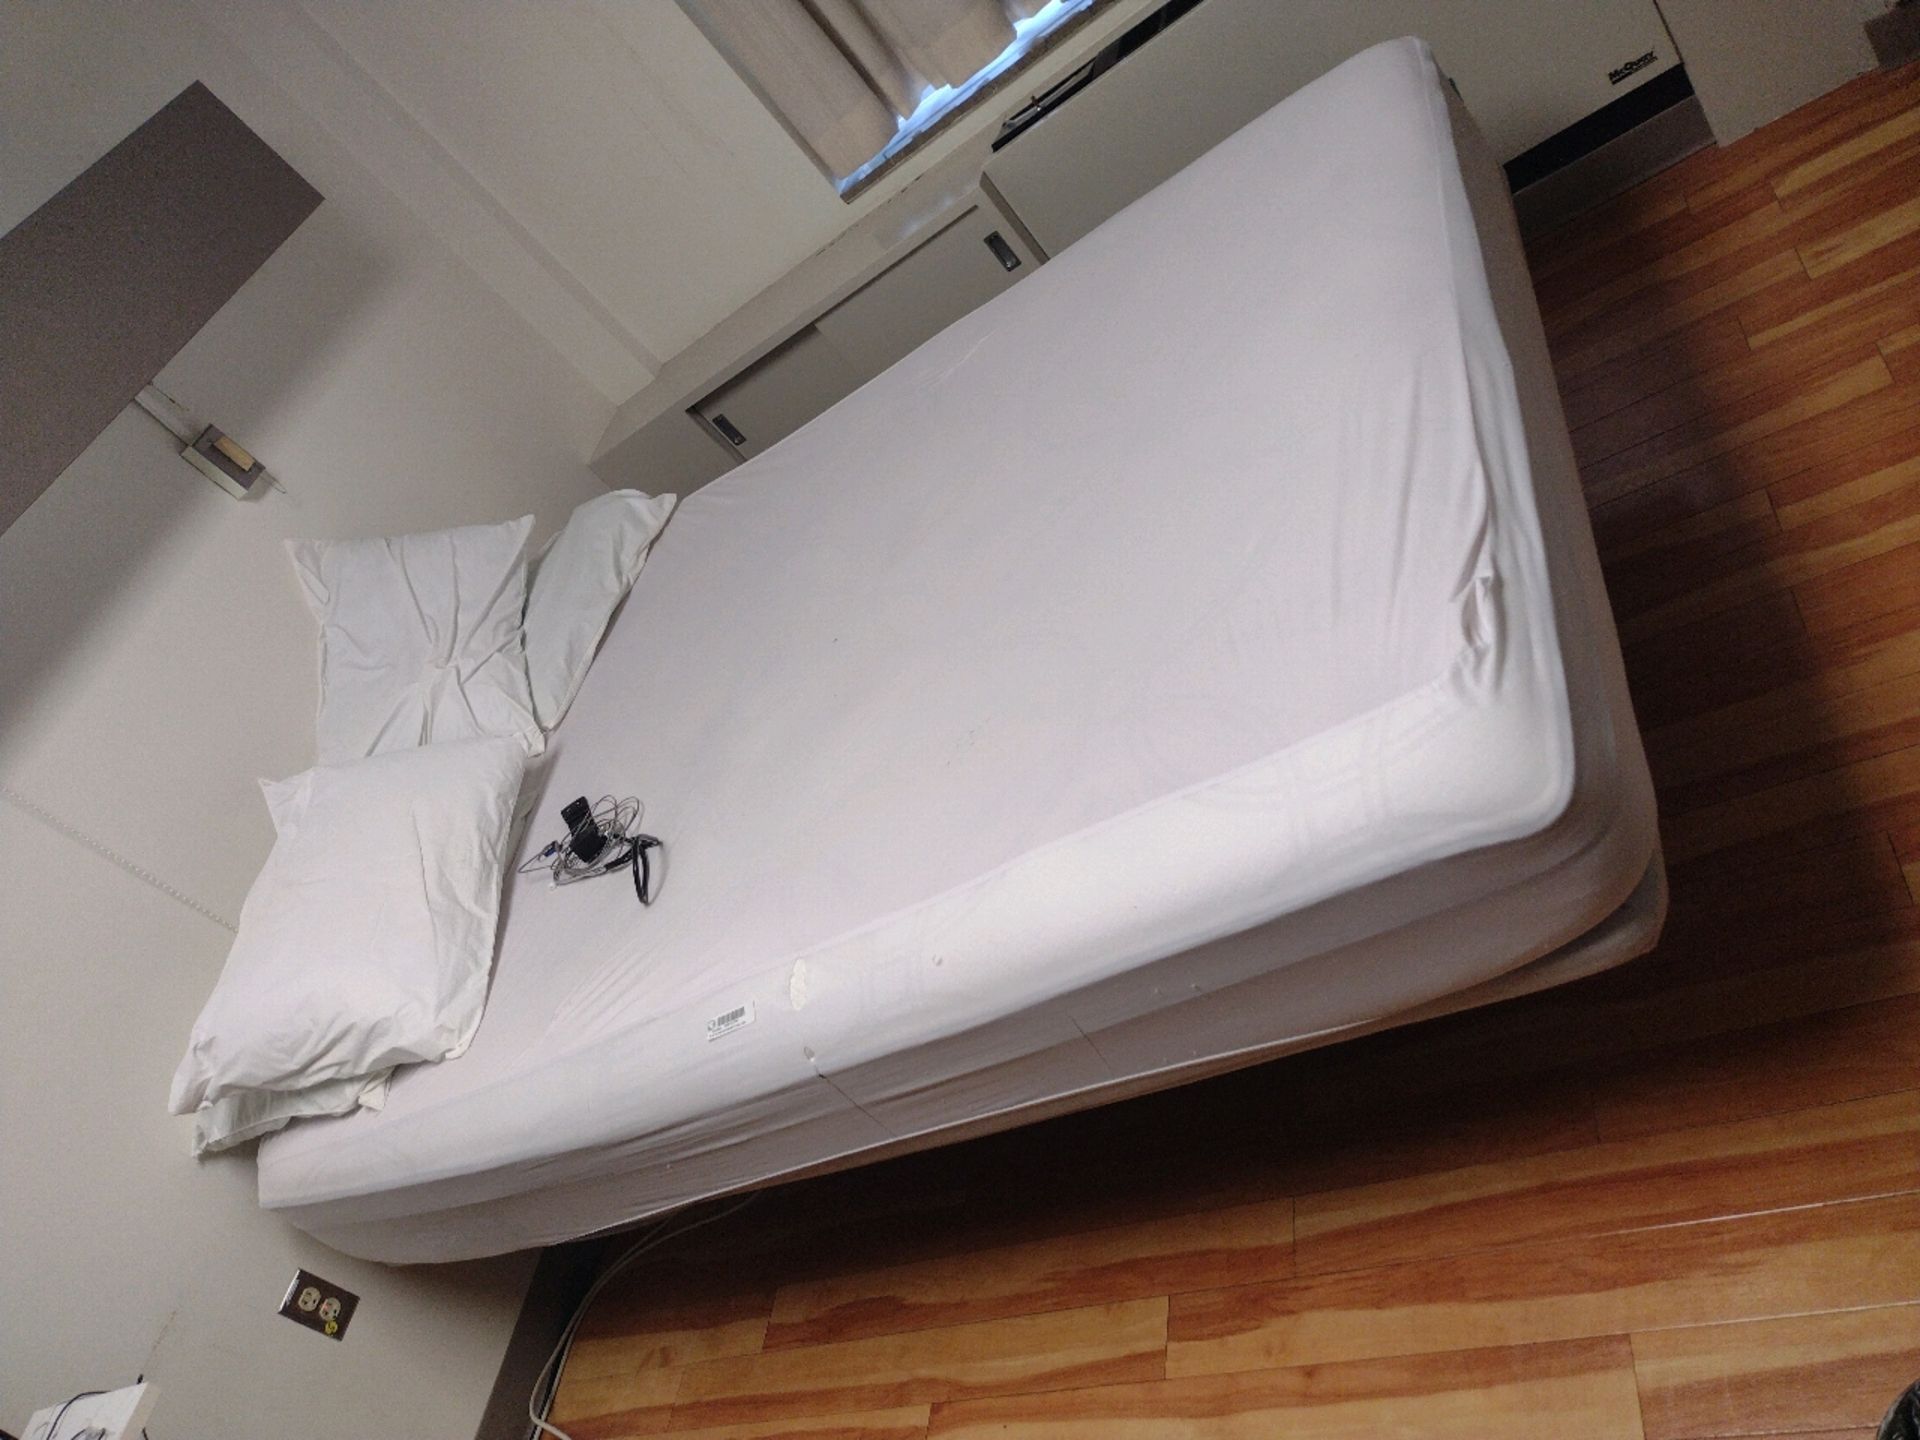 KING BED FRAME WITH MATTRESS